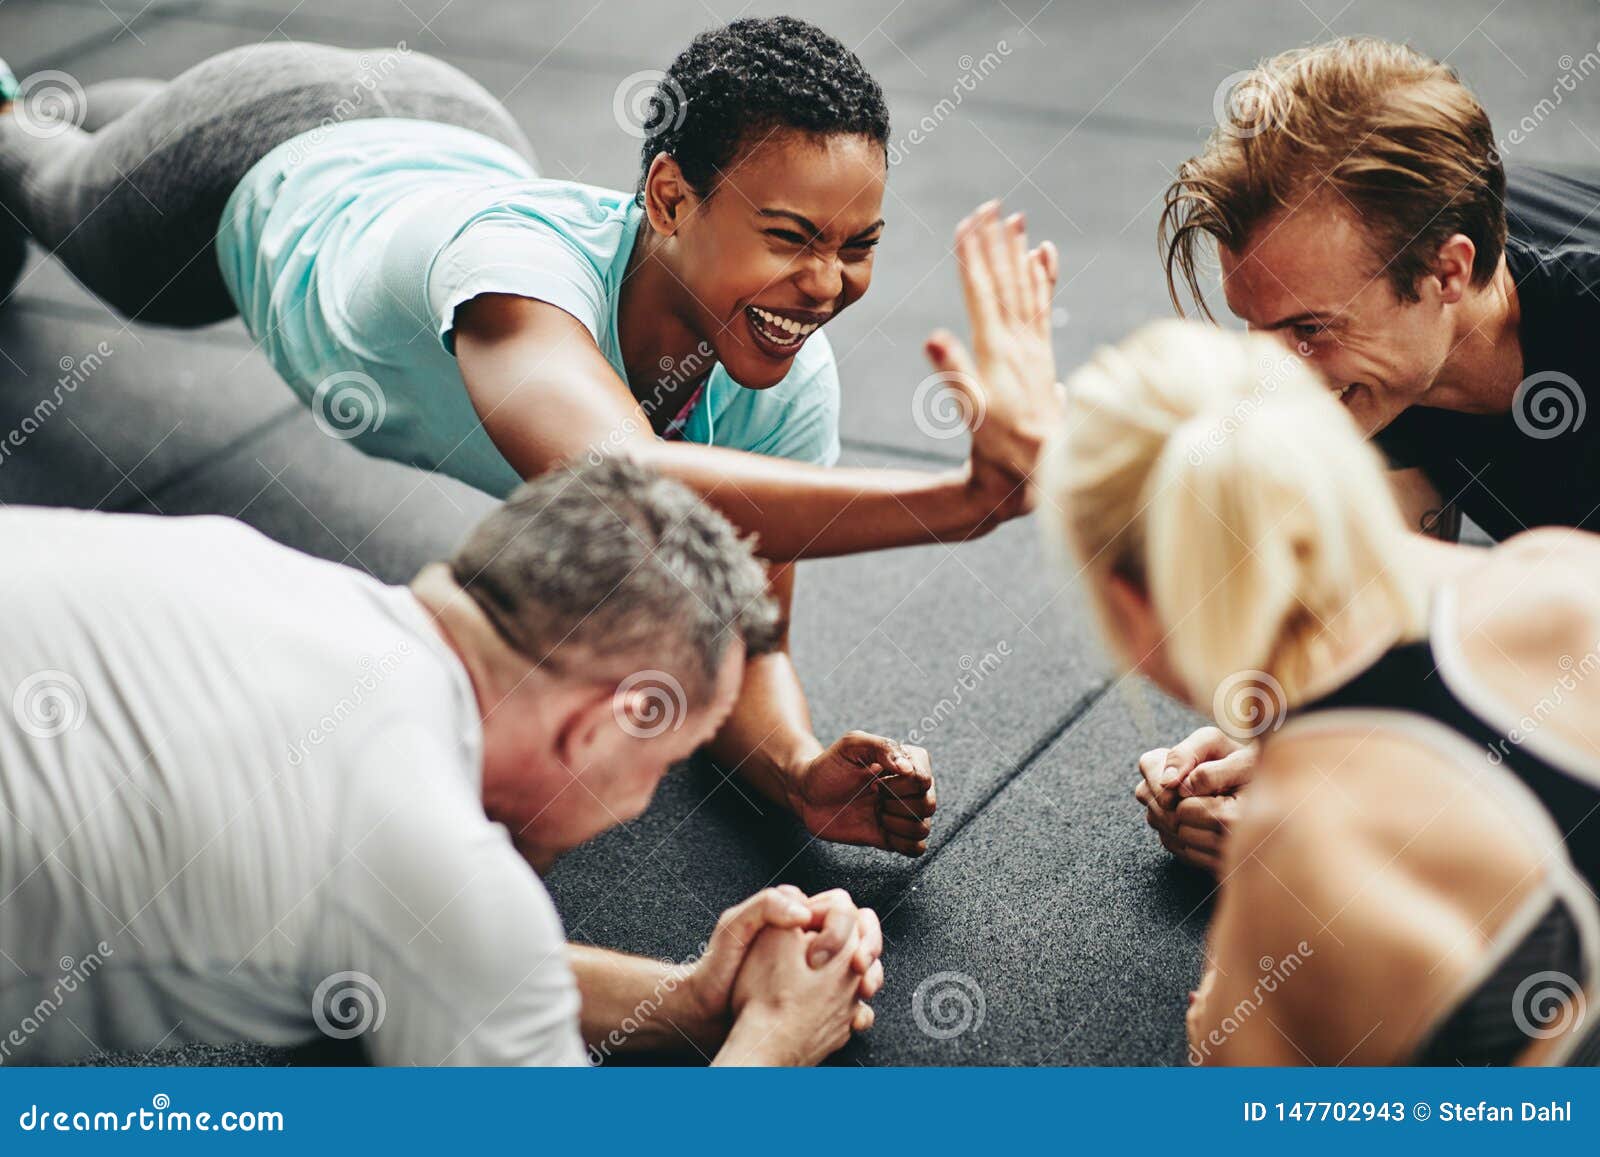 two laughing women high fiving while planking at the gym